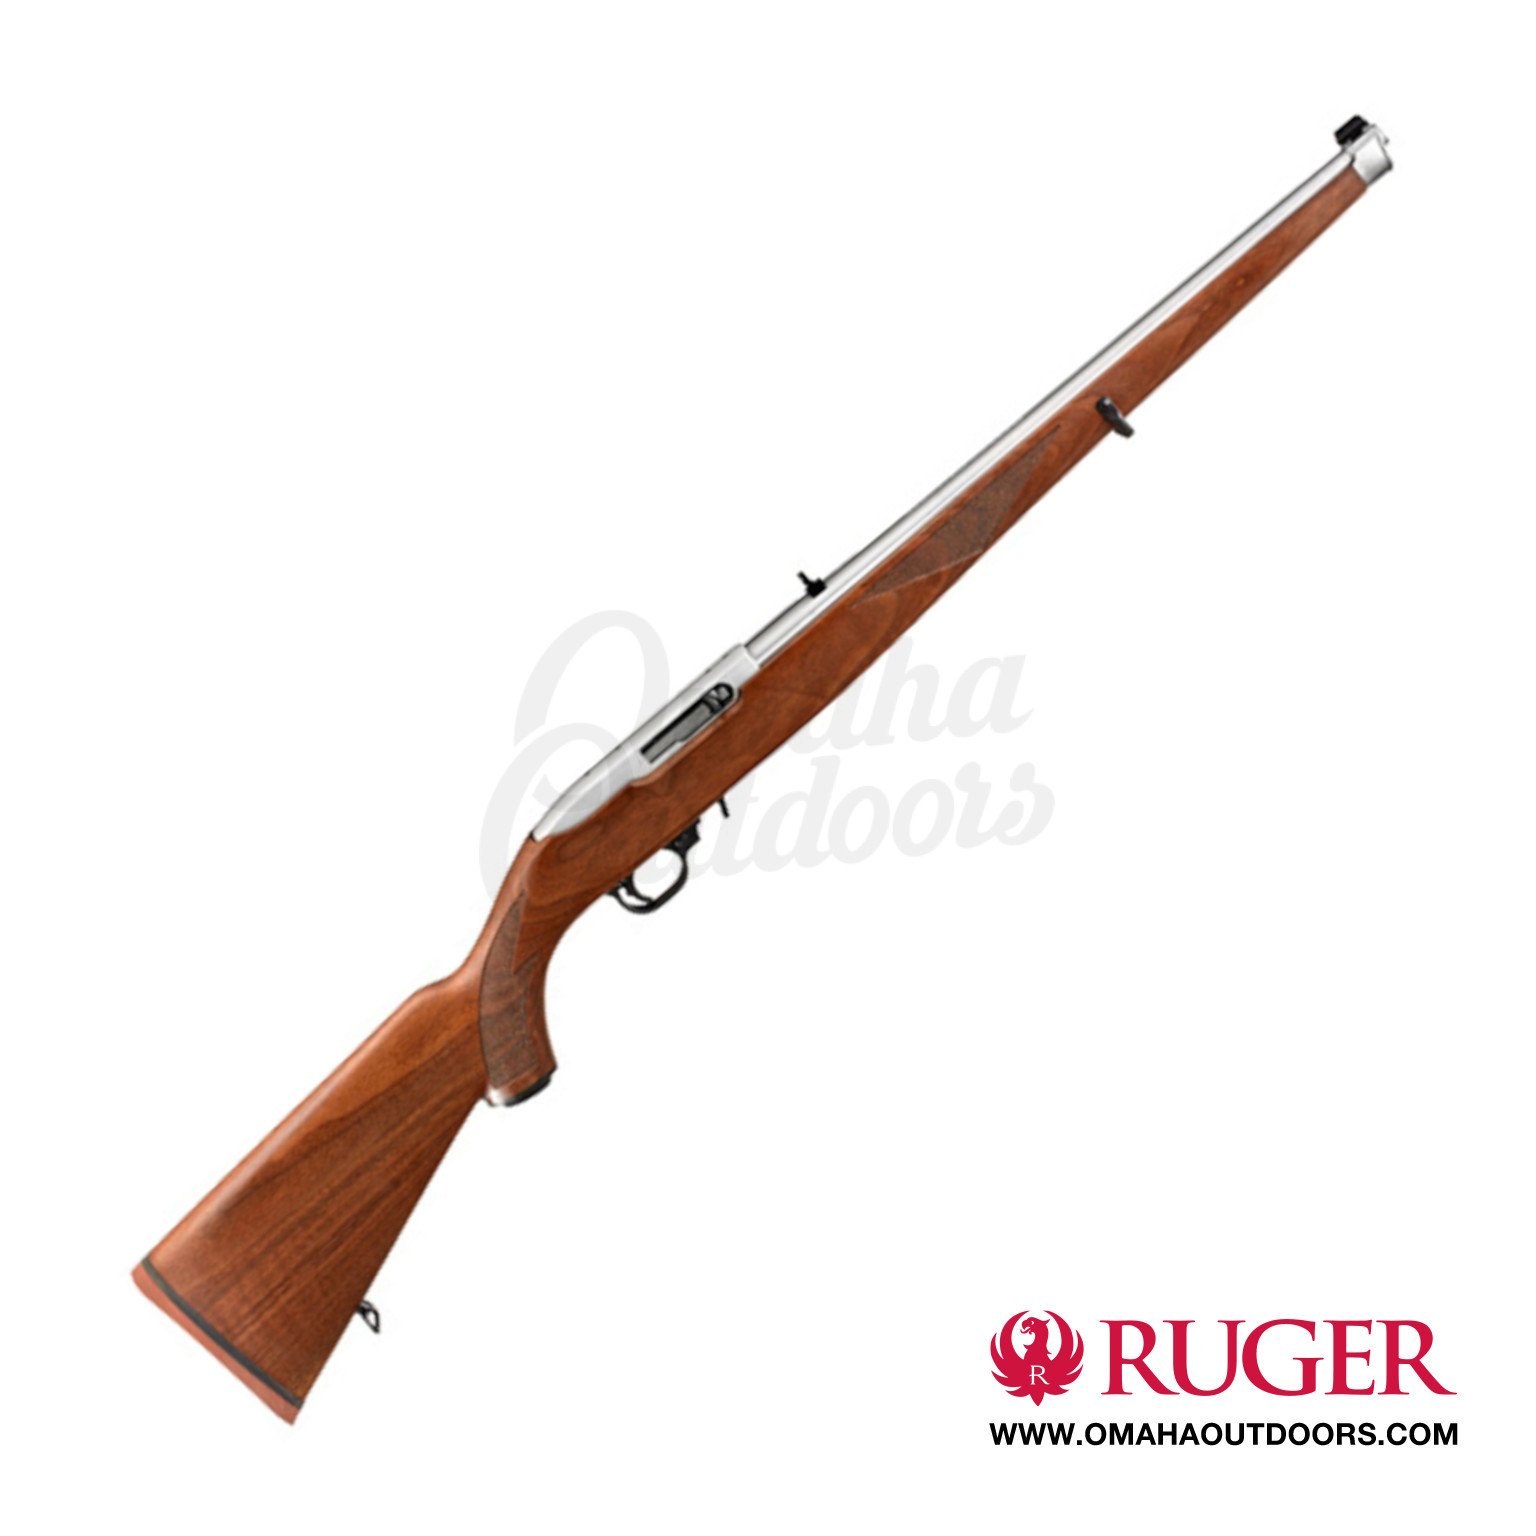 Ruger 10/22 Carbine Brown Rifle 10 RD 22LR Stainless 18.5 Mannlicher Stock  - Omaha Outdoors